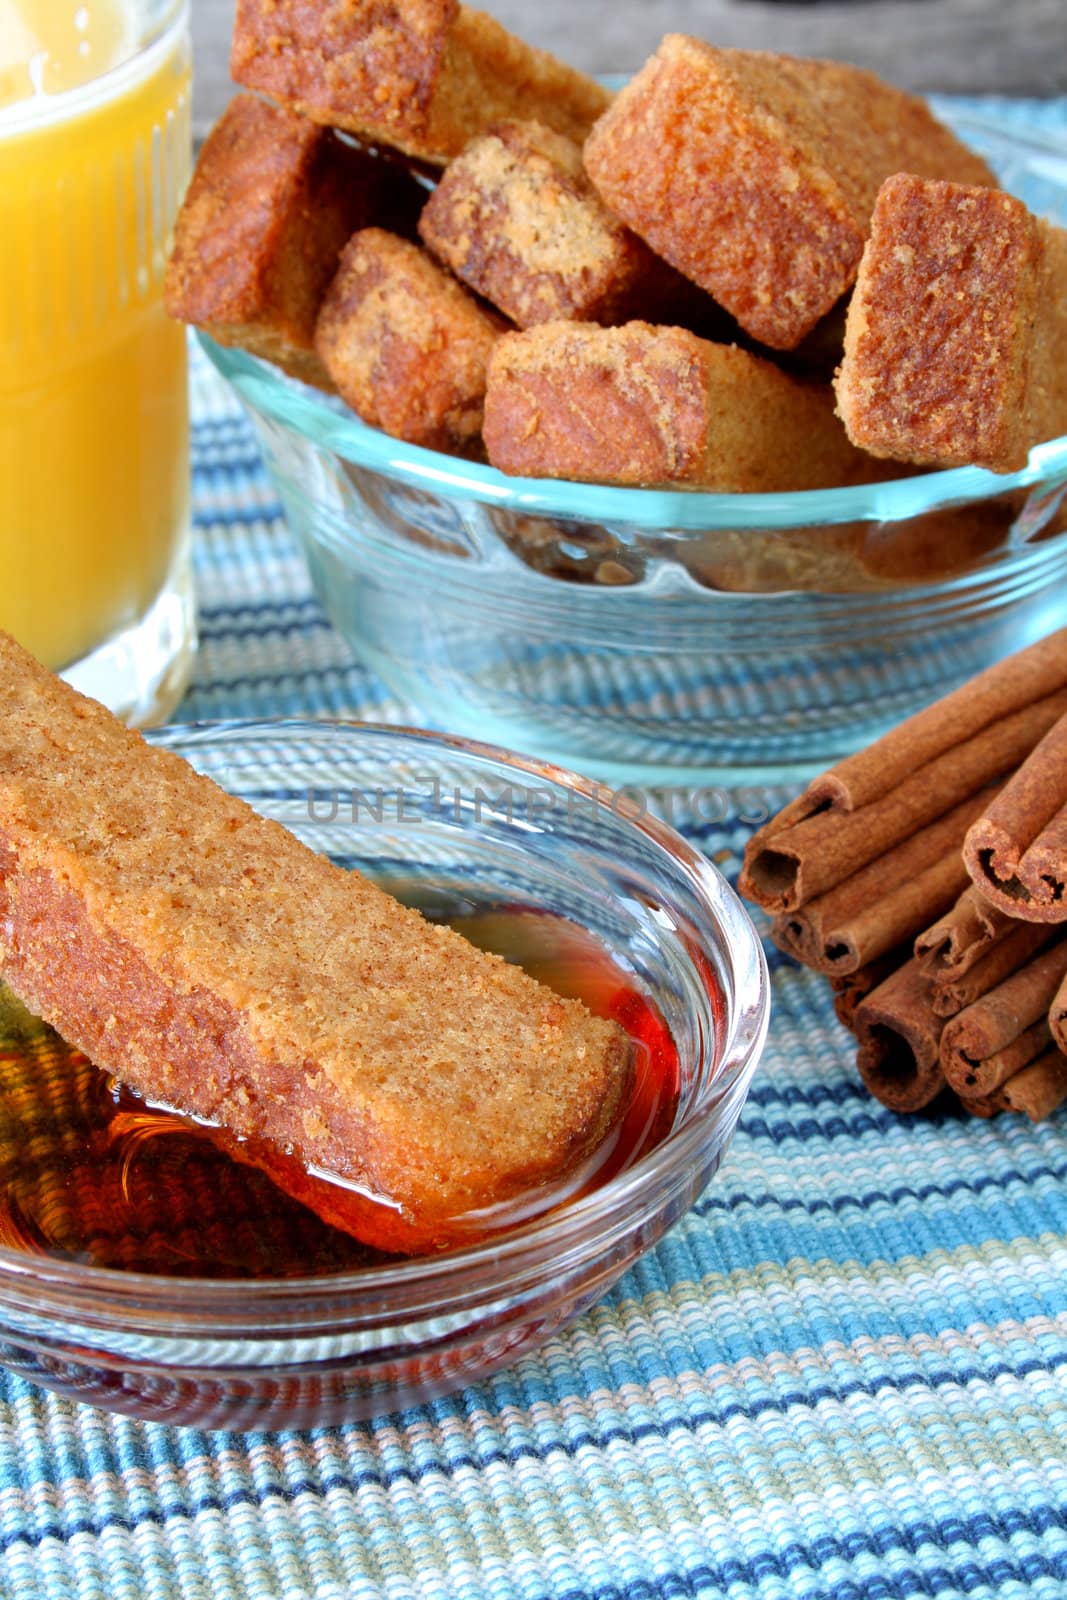 French Toast Sticks by thephotoguy